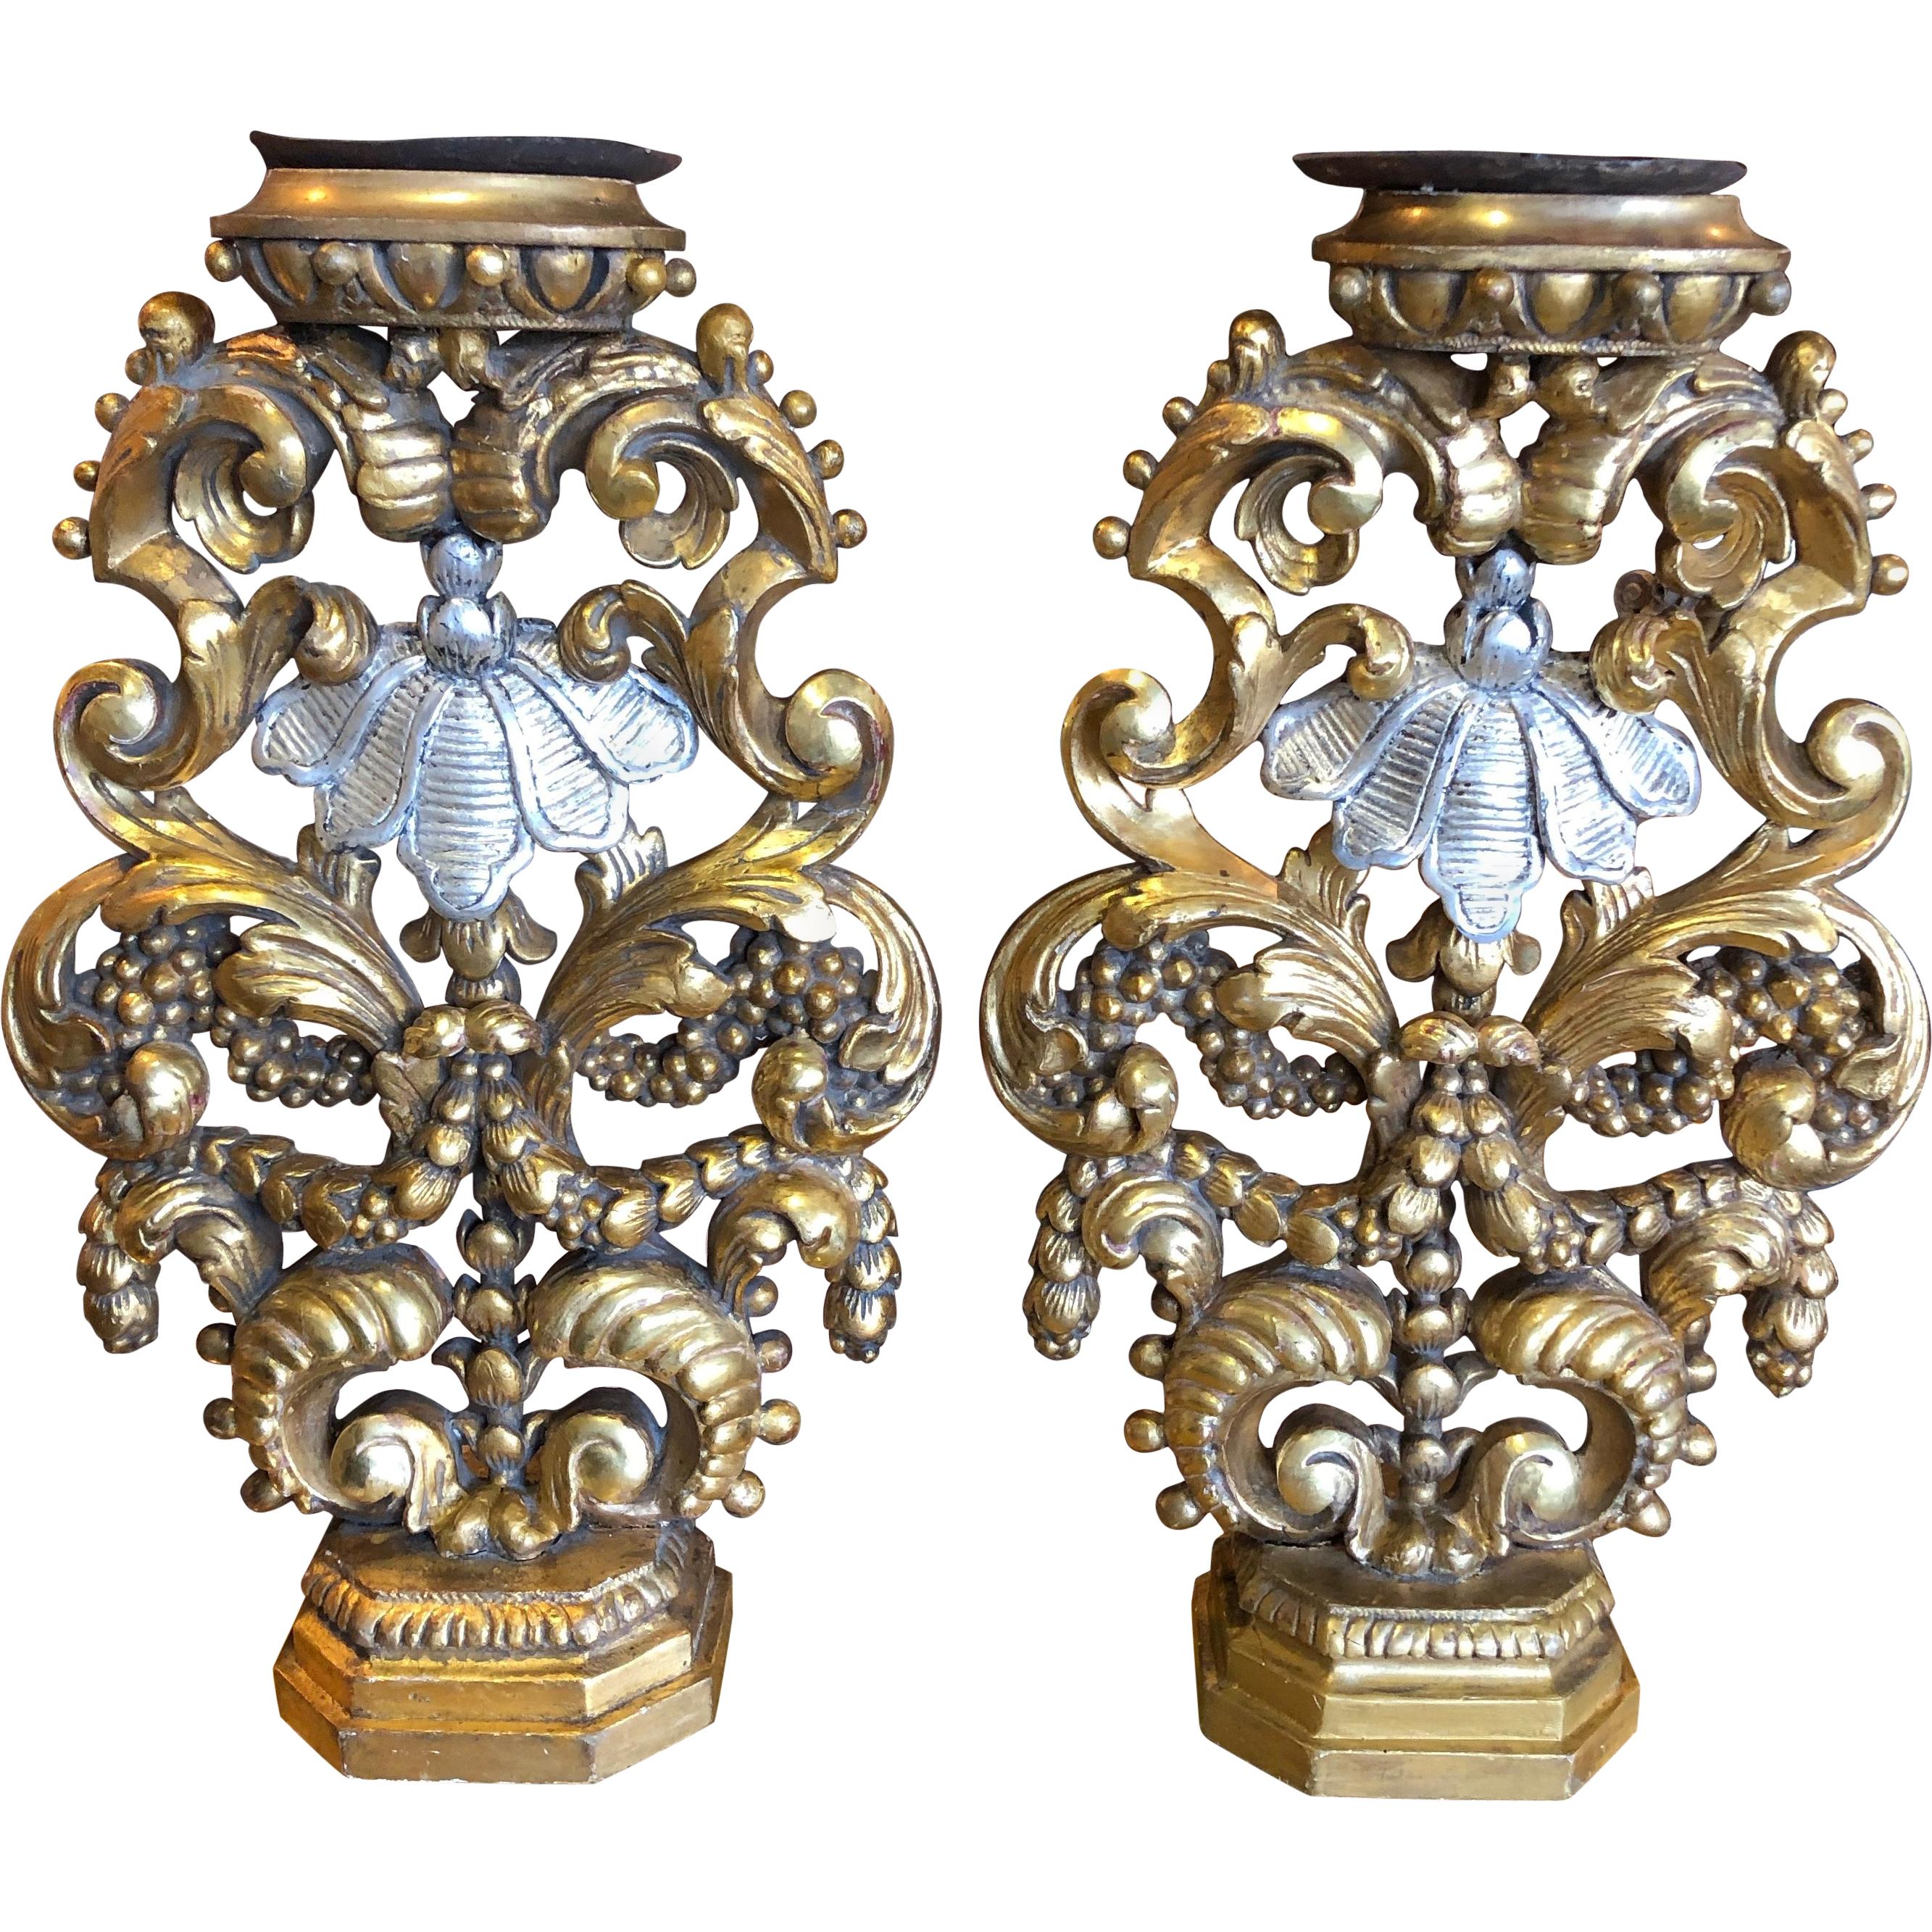 Pair of Baroque Style Giltwood and Silver Gilt Candlesticks